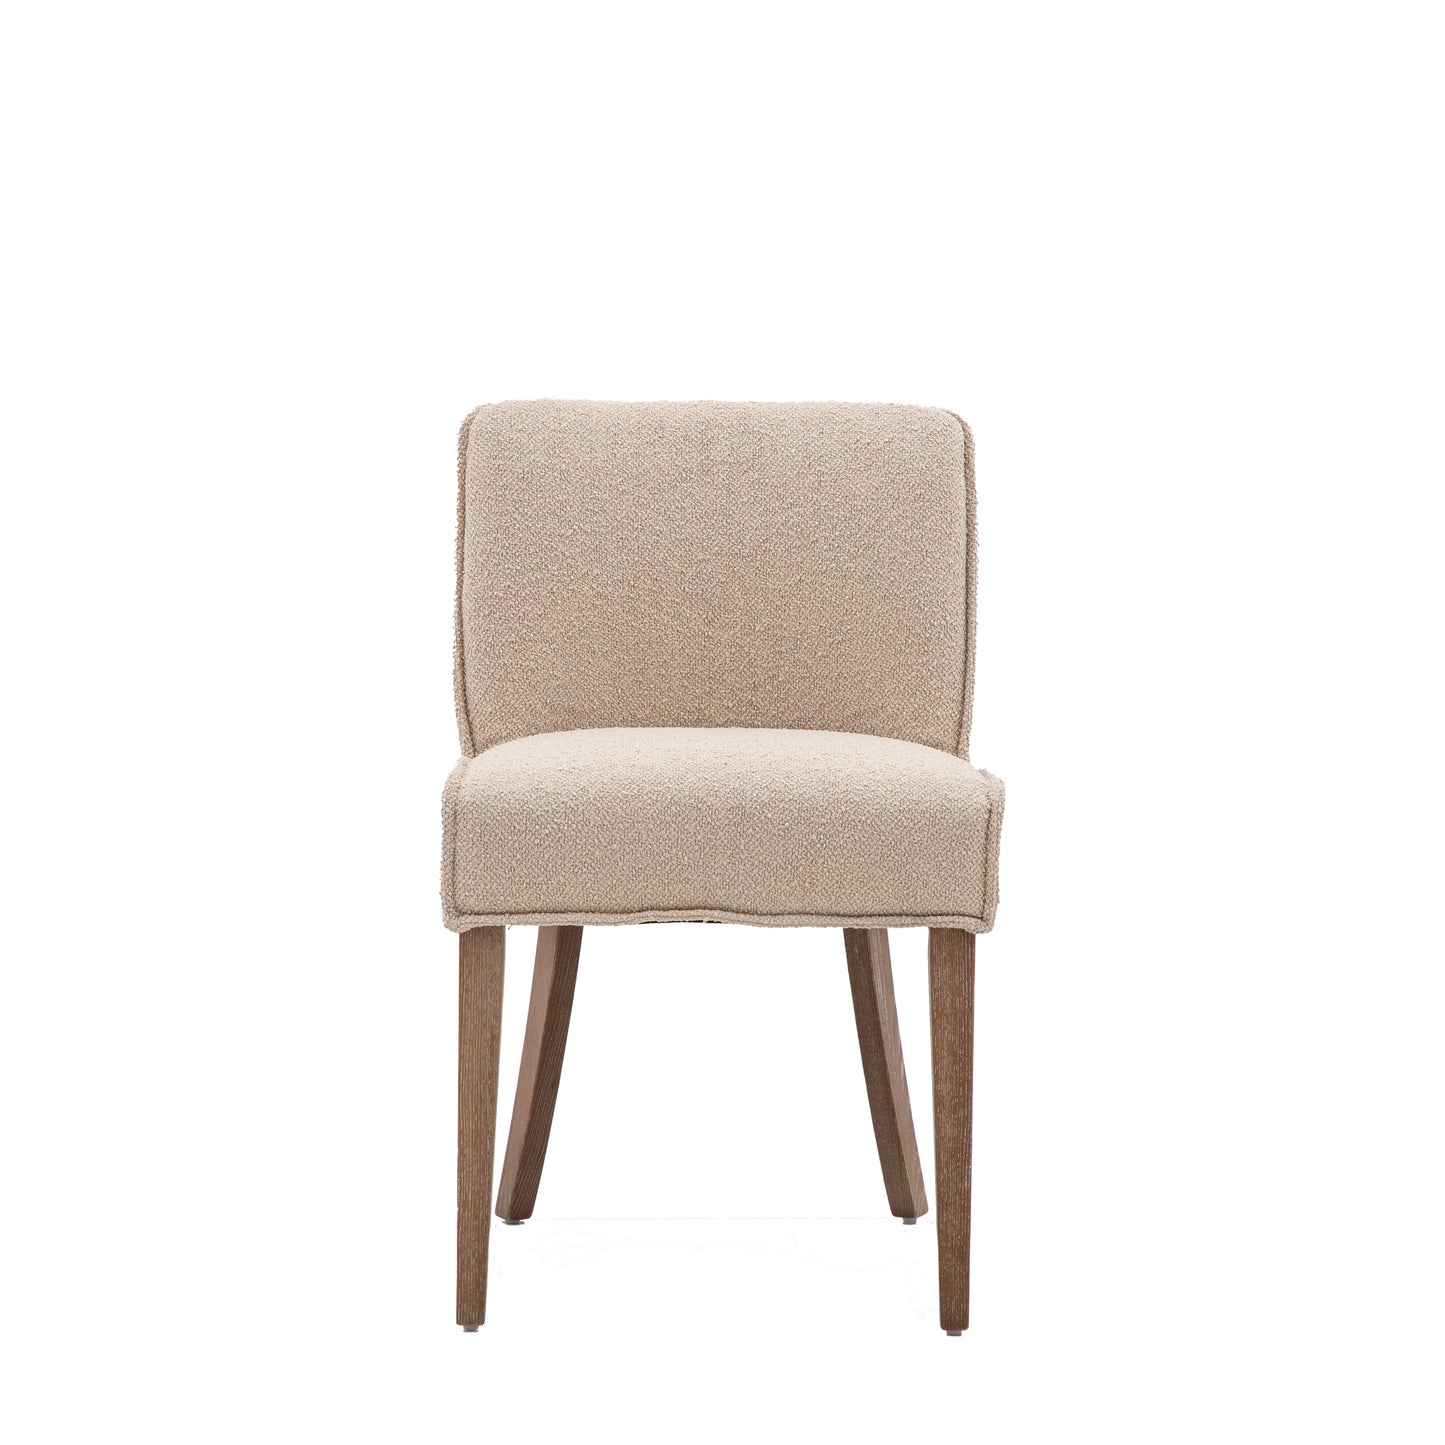 Tarnby Chair Taupe (2pk)